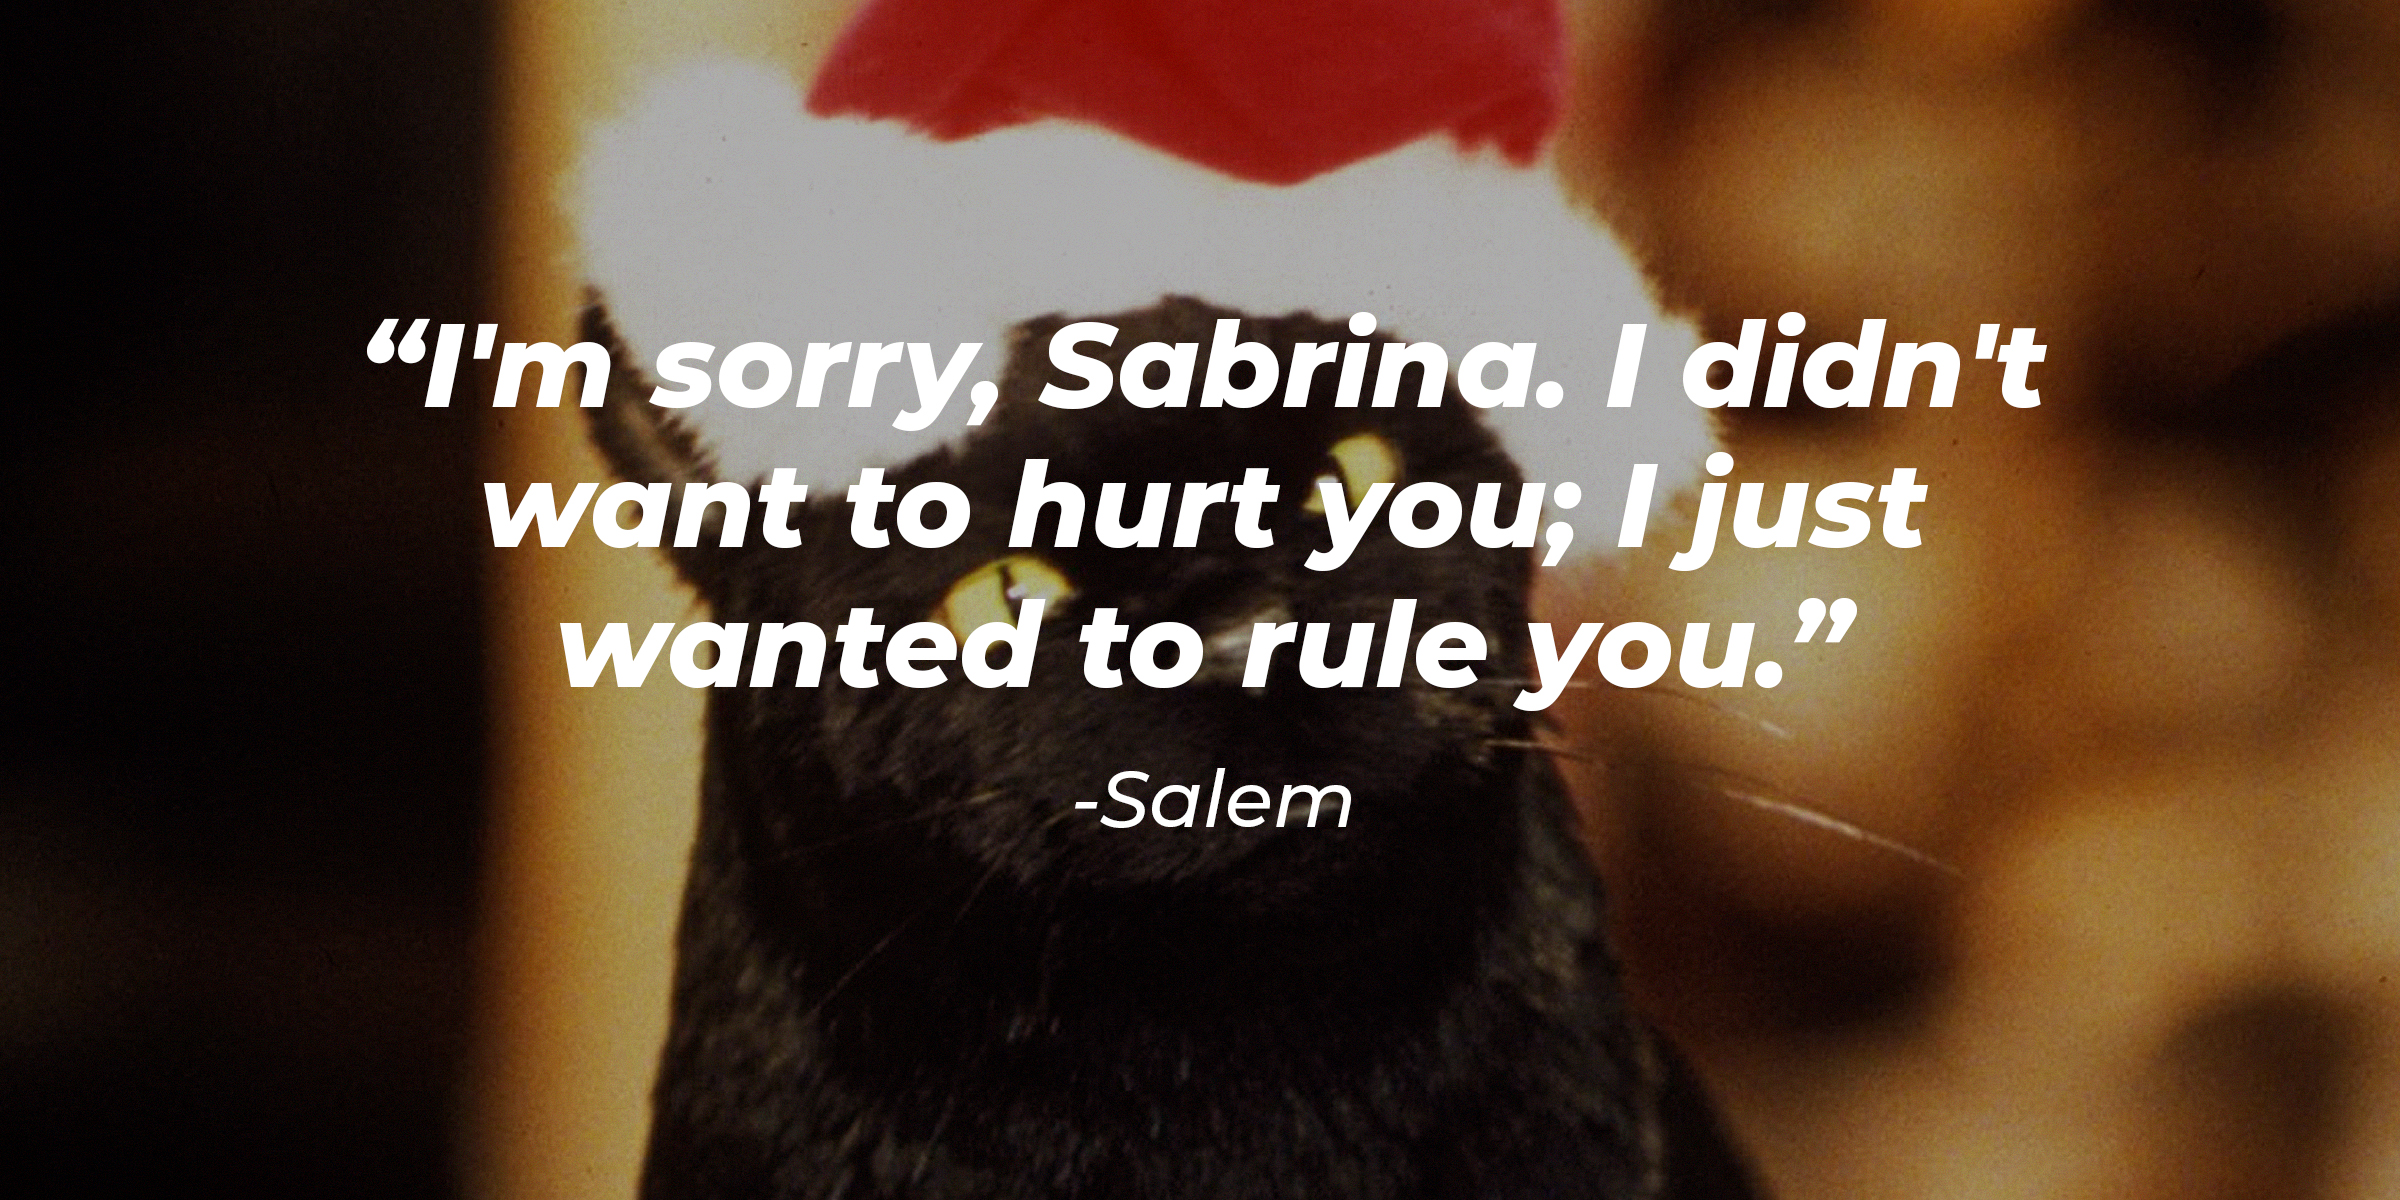 Salem with his quote: “I'm sorry, Sabrina. I didn't want to hurt you; I just wanted to rule you.” | Source: facebook.com/SabrinaTheTeenageWitchTV